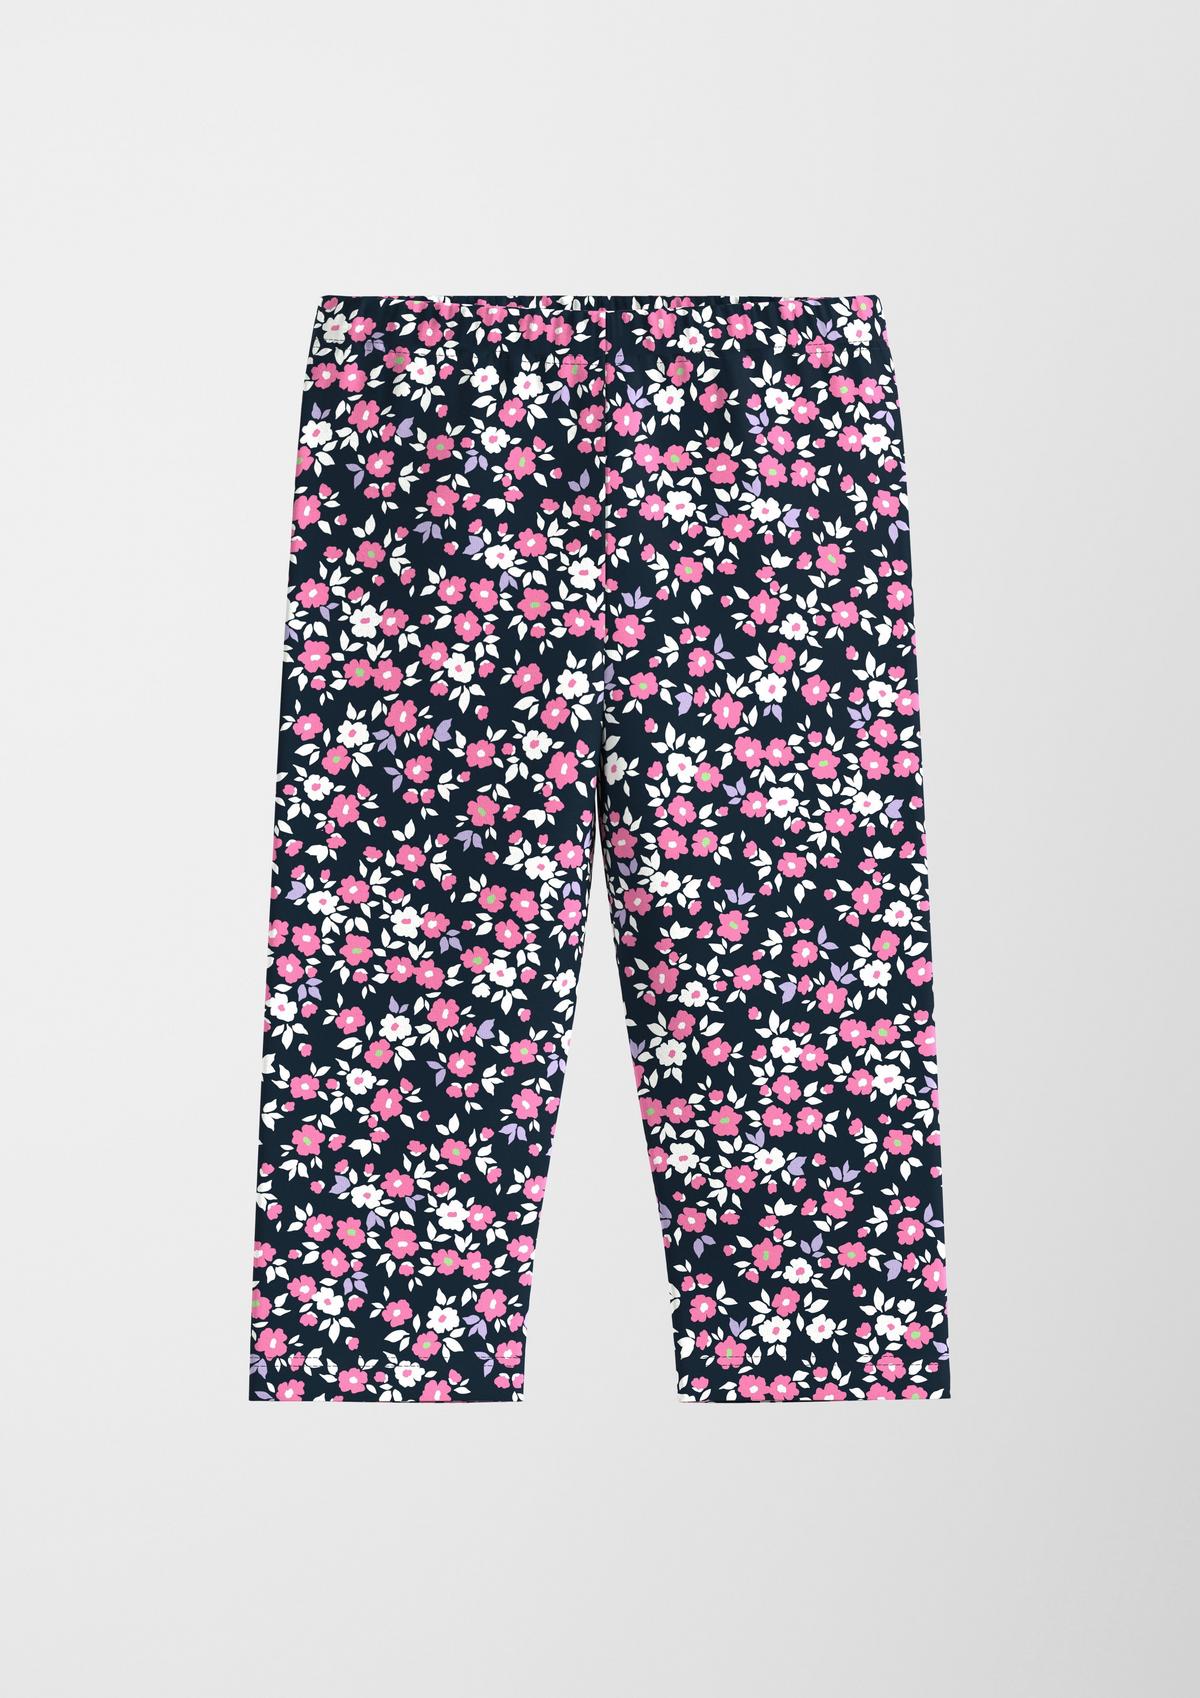 s.Oliver Capri leggings with an all-over print